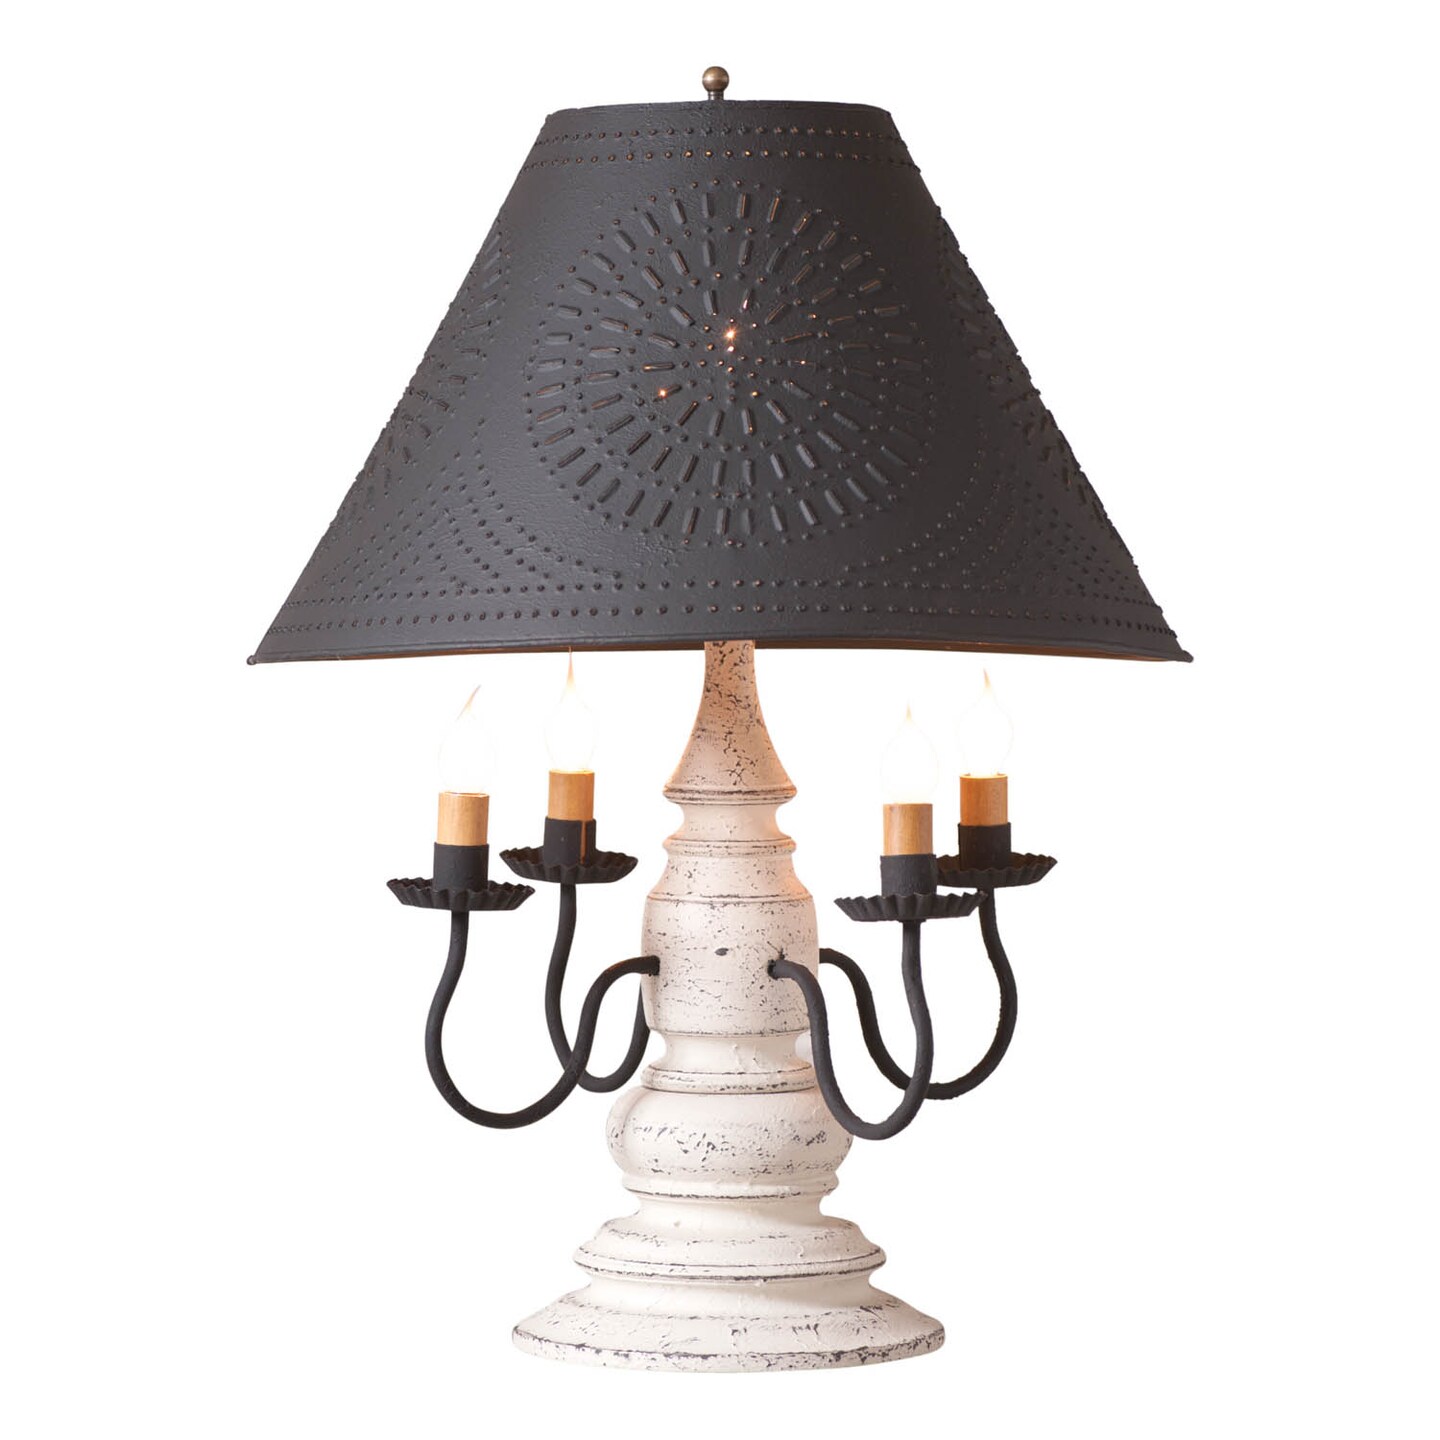 Harrison Lamp in Americana White with Shade